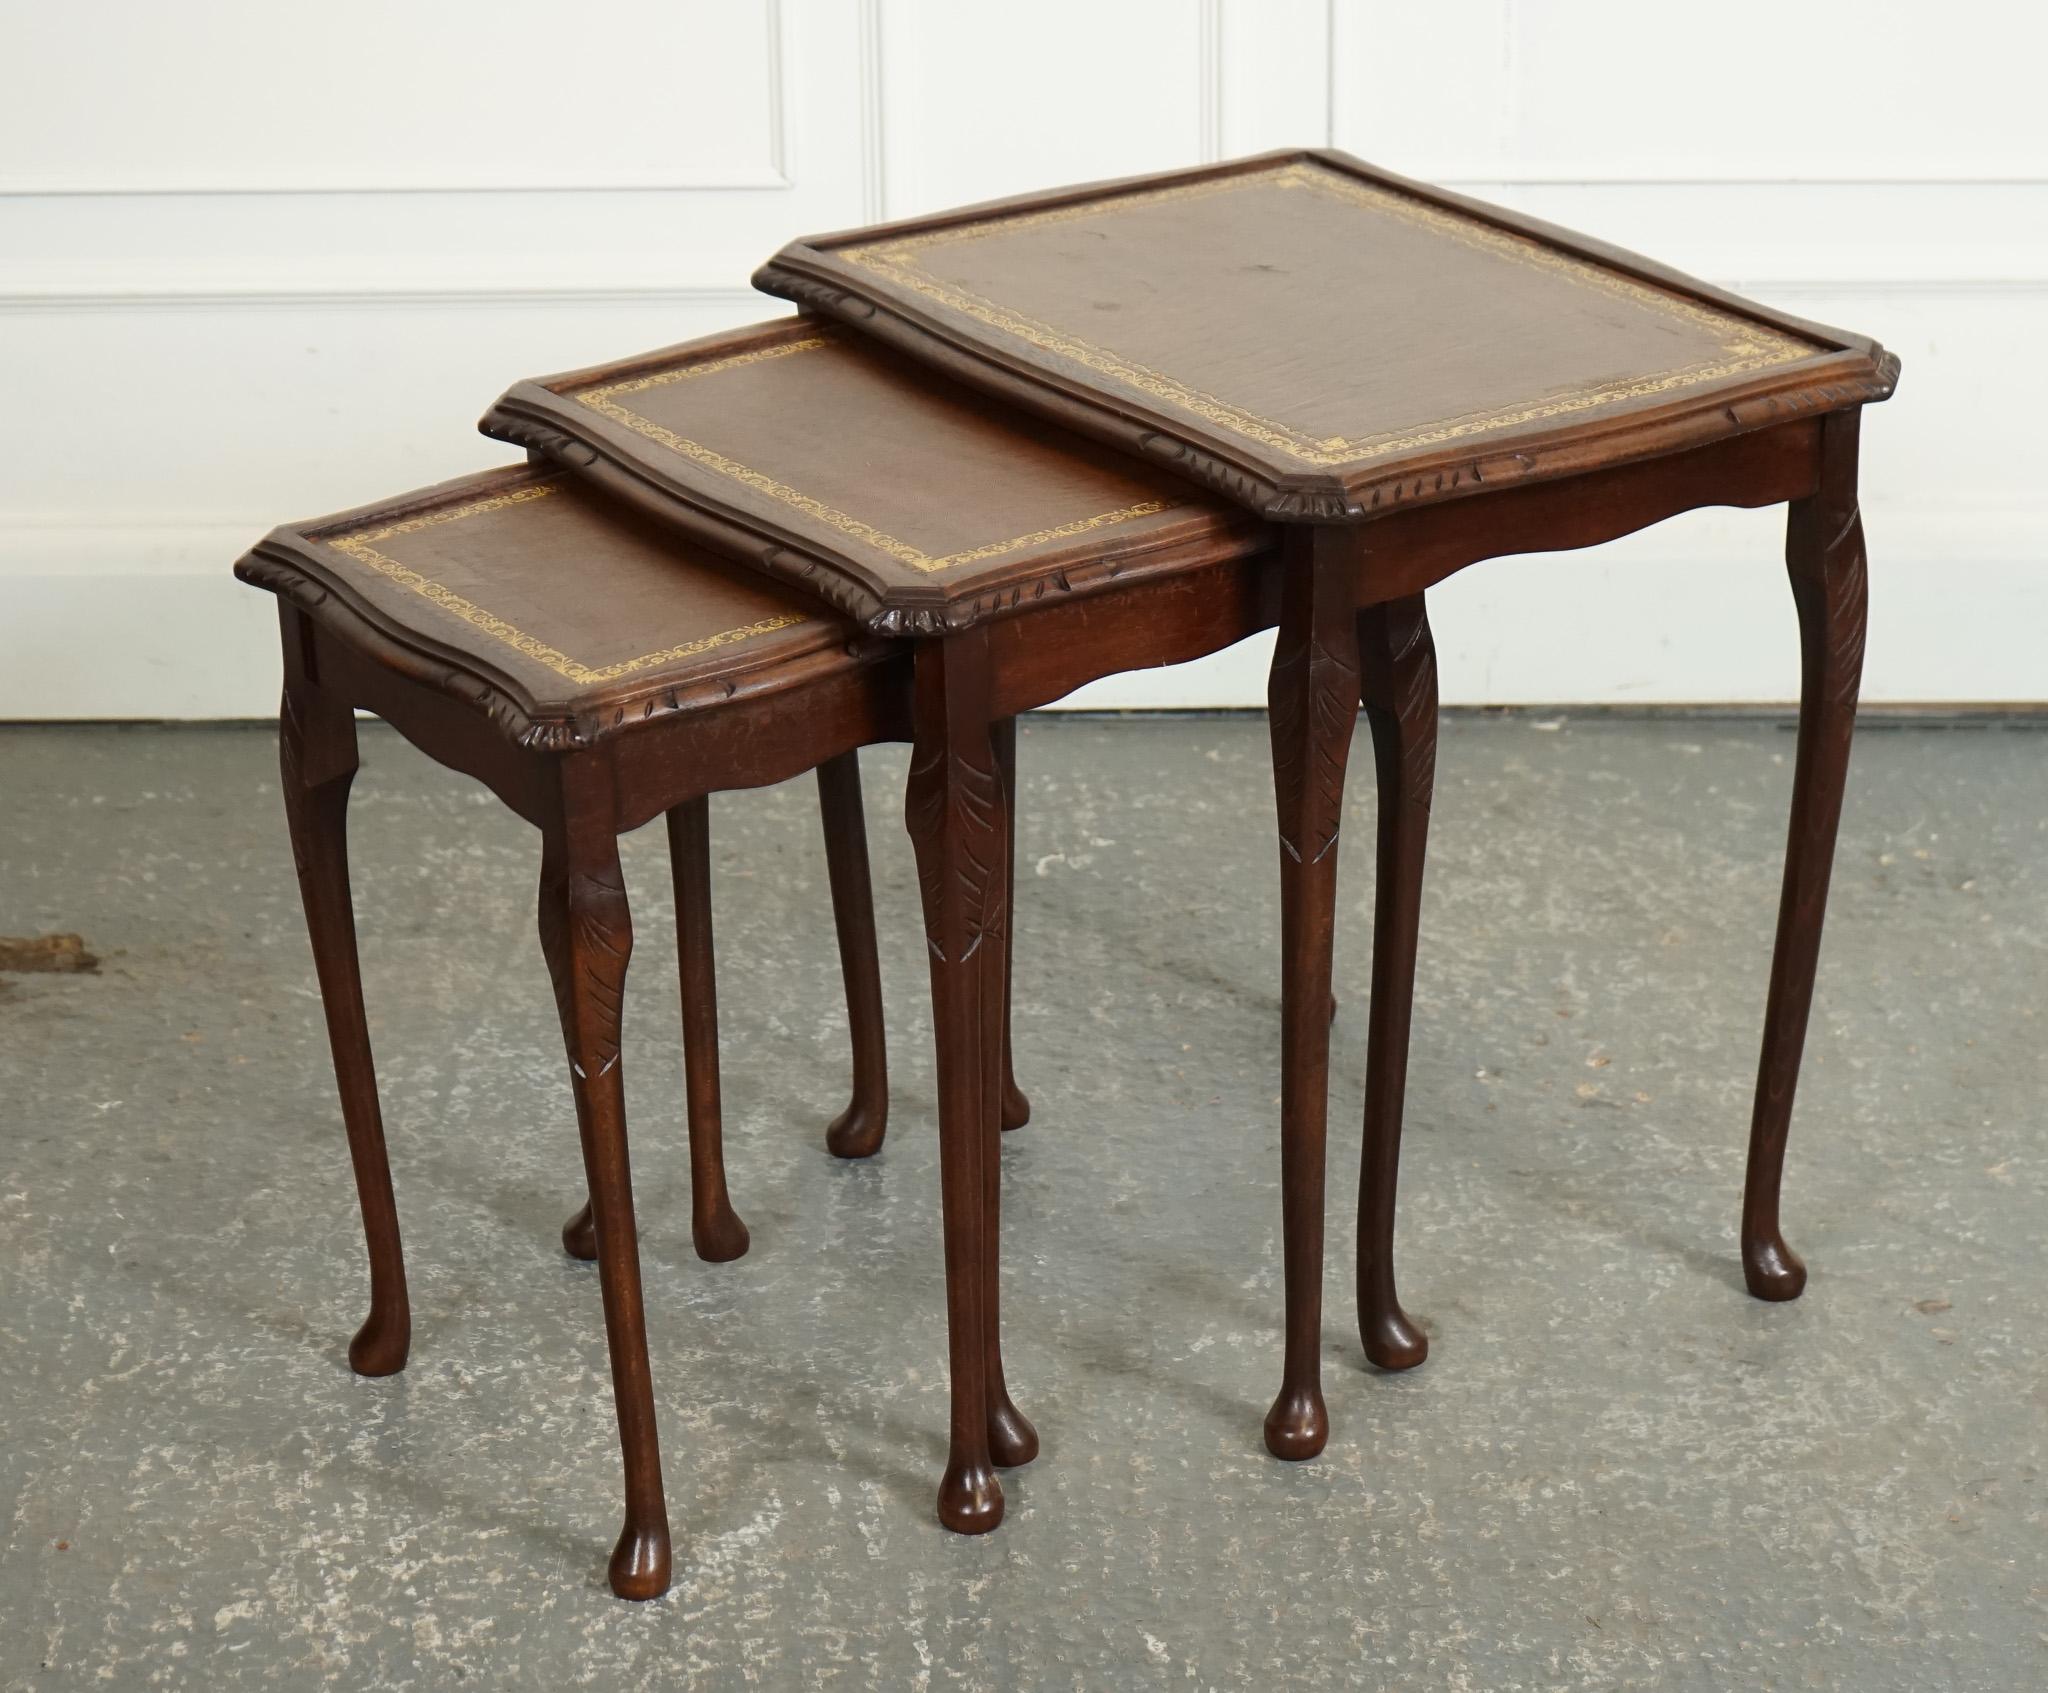 British VINTAGE NEST OF TABLES QUEEN ANNE STYLE LEGS WiTH BROWN EMBOSSED LEATHER TOP For Sale